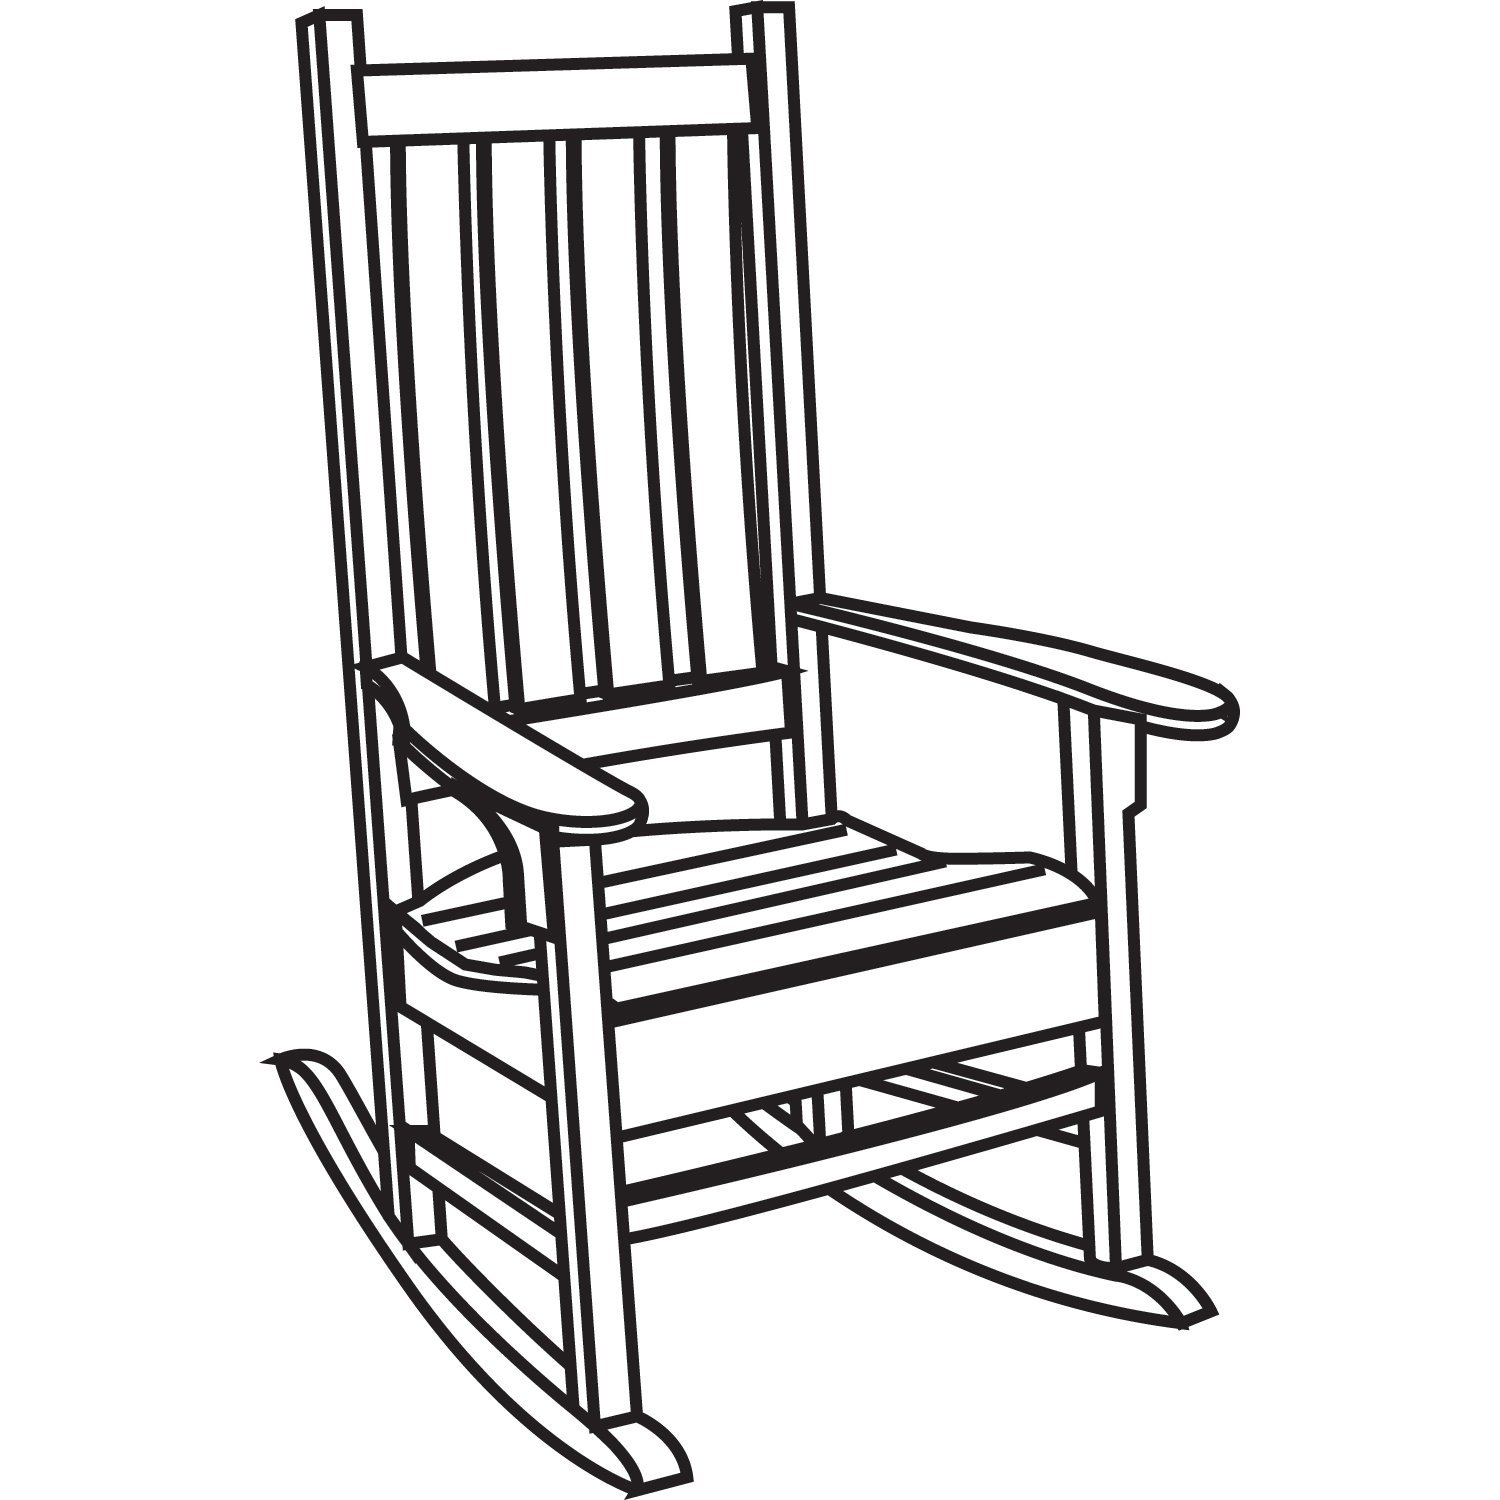 chairs clipart black and white - photo #29